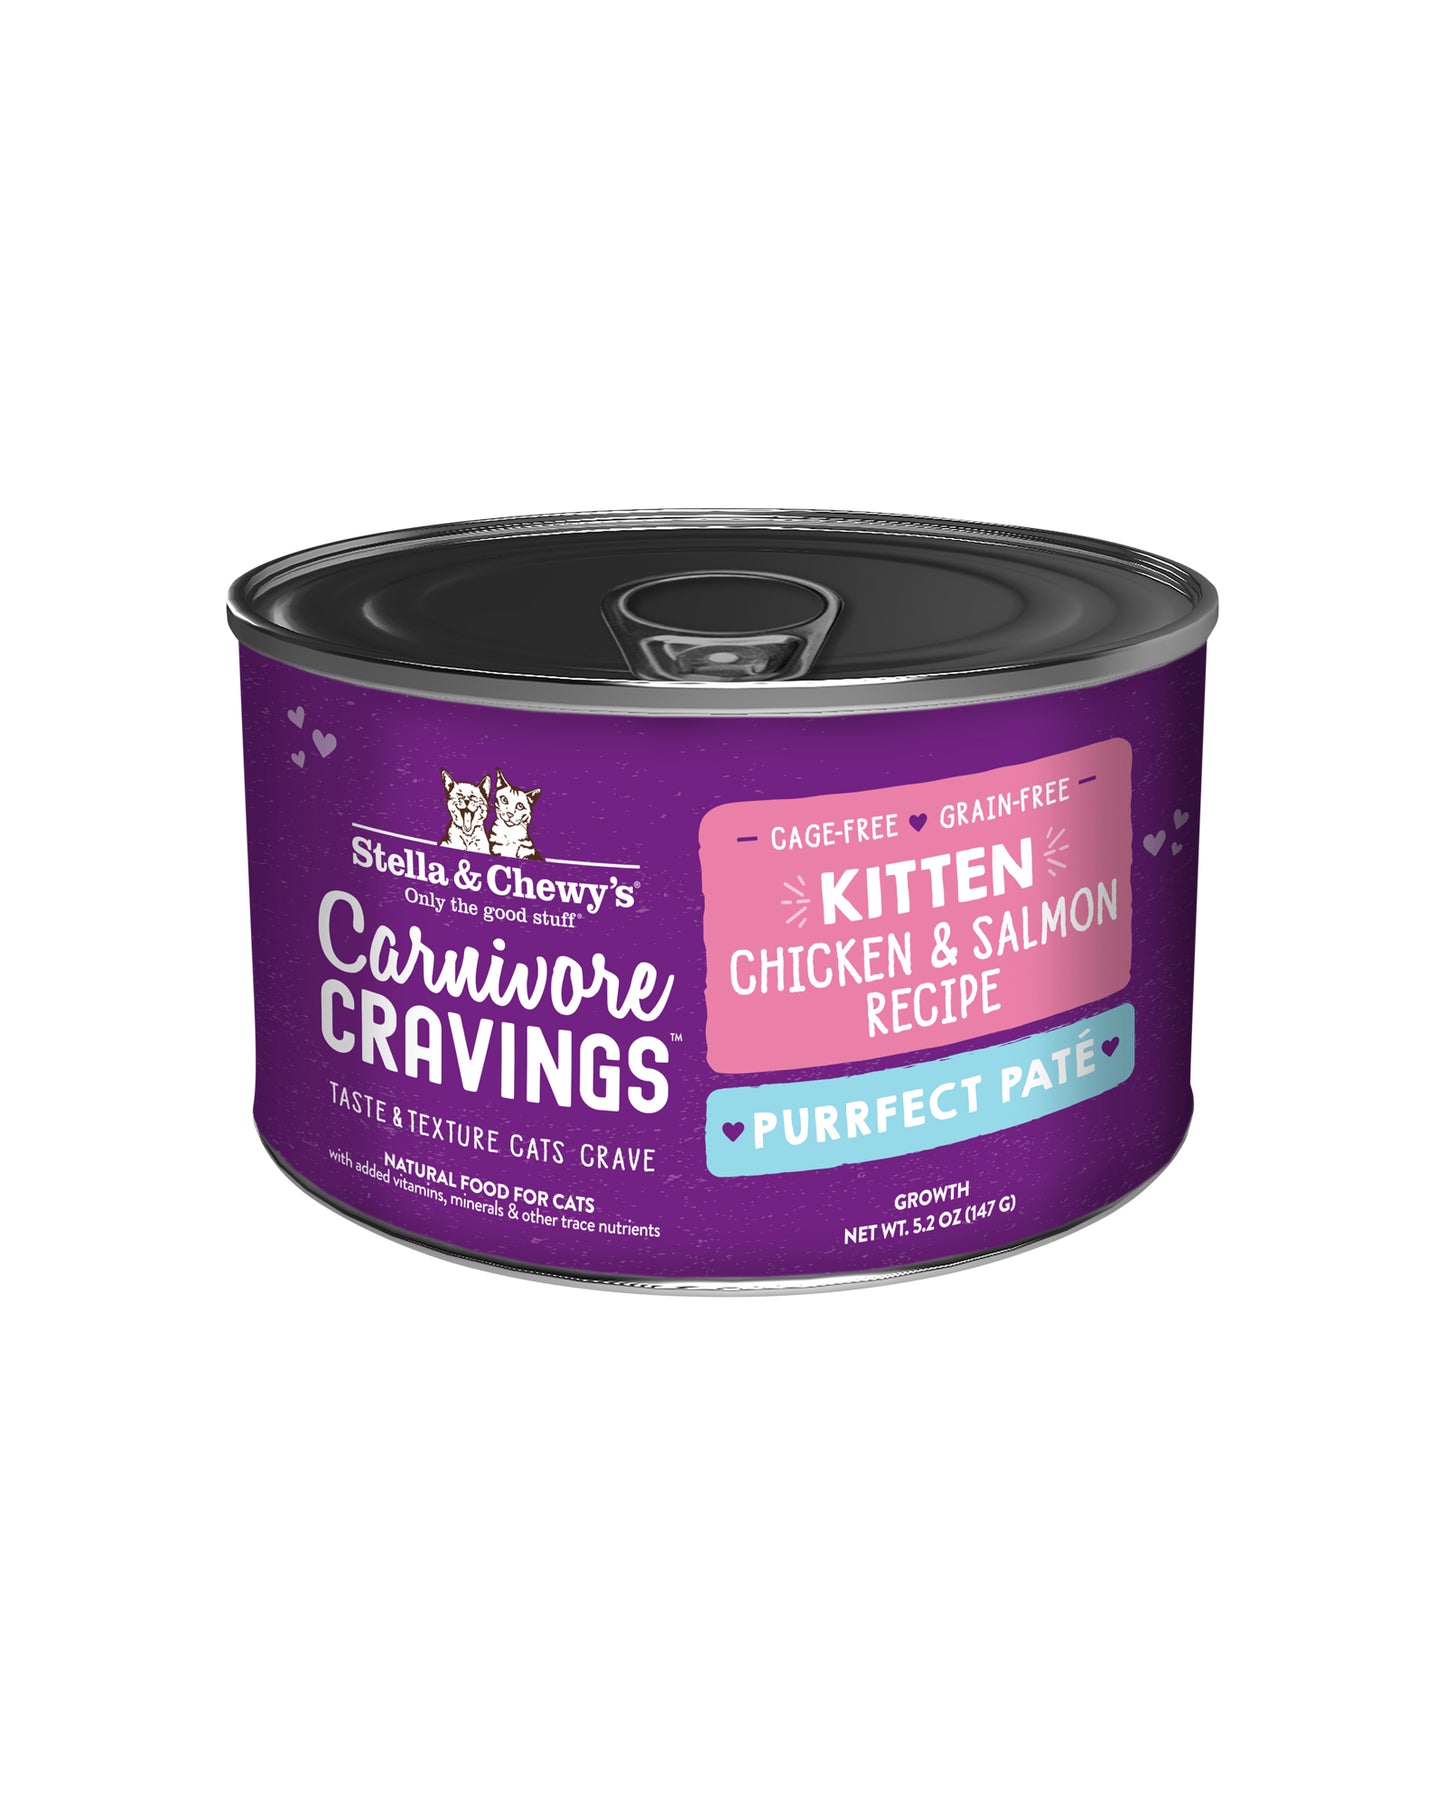 Stella & Chewy's Purrfect Grain Free Pate for Kittens - Chicken & Salmon Recipe